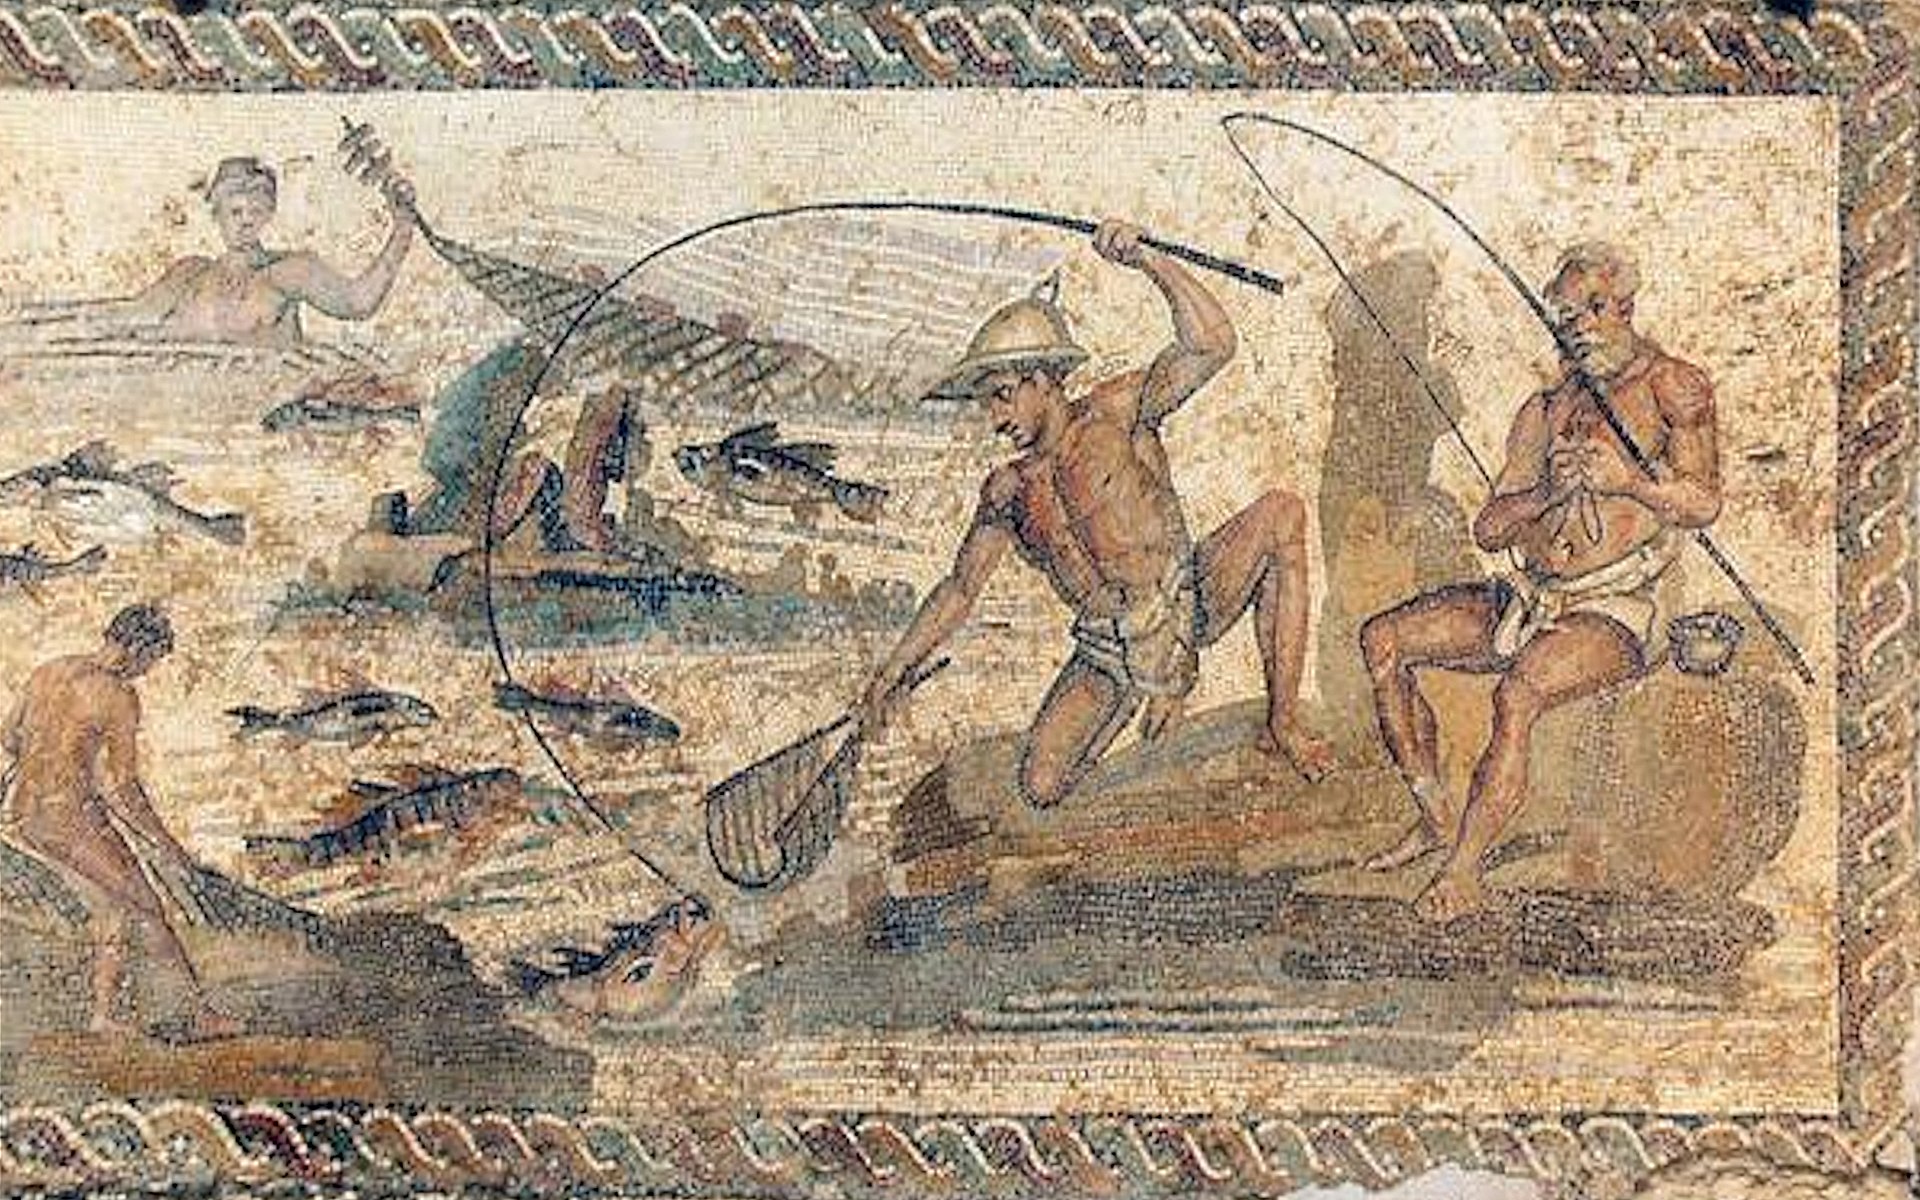 More details Angling in the 1st century CE. Villa of the Nile Mosaic, Lepcis Magna, Tripoli National Museum.